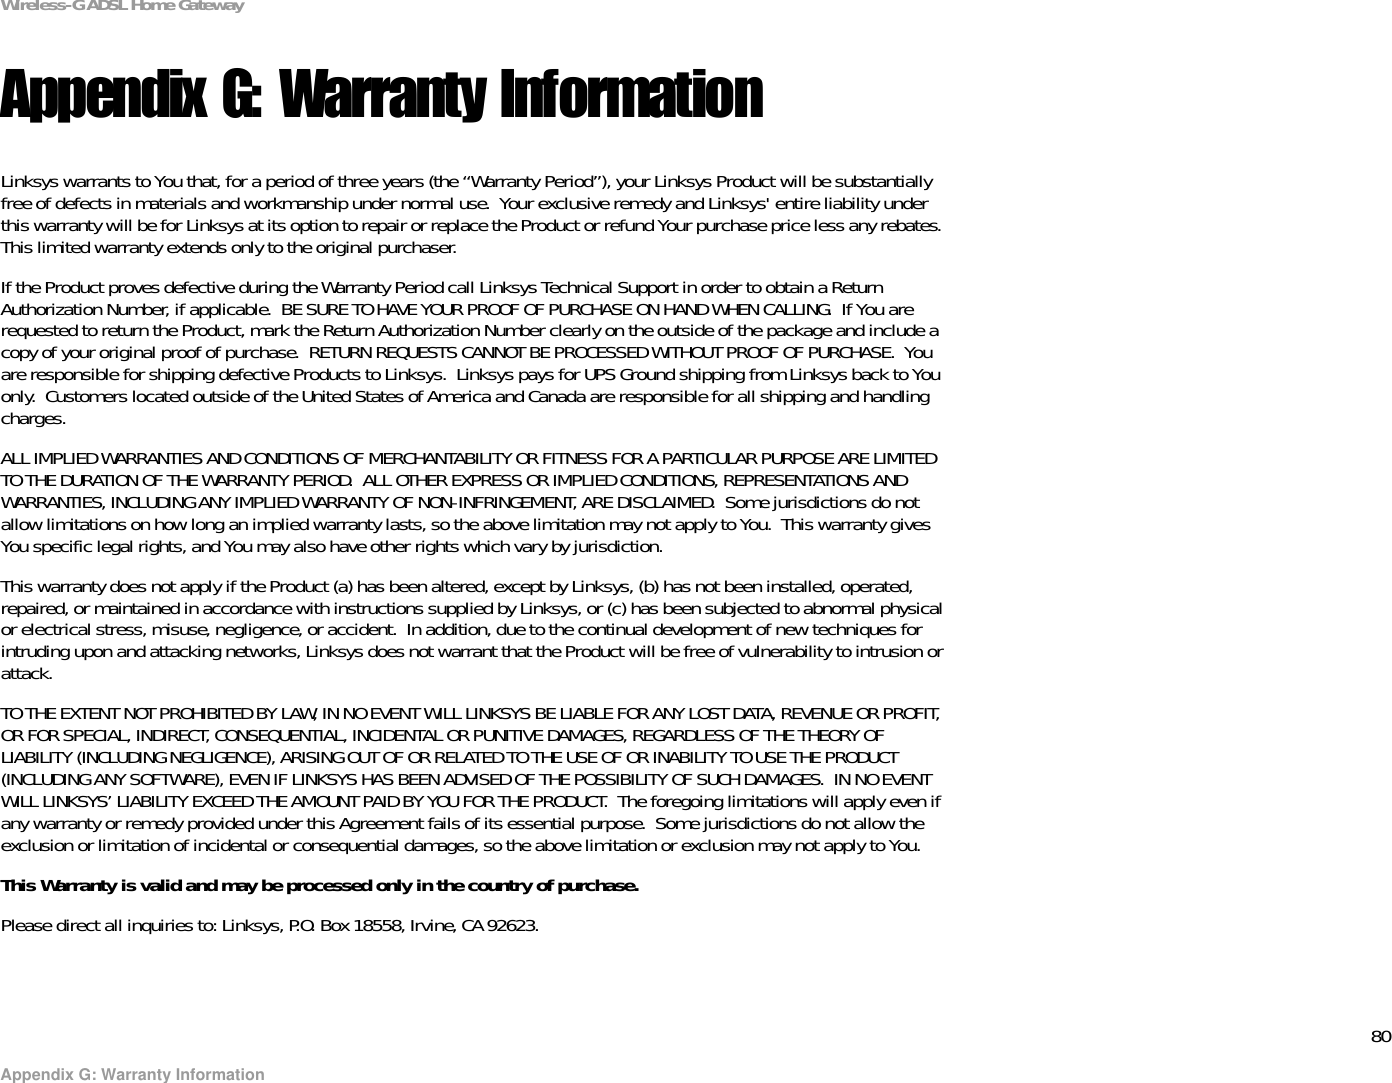 80Appendix G: Warranty InformationWireless-G ADSL Home GatewayAppendix G: Warranty InformationLinksys warrants to You that, for a period of three years (the “Warranty Period”), your Linksys Product will be substantially free of defects in materials and workmanship under normal use.  Your exclusive remedy and Linksys&apos; entire liability under this warranty will be for Linksys at its option to repair or replace the Product or refund Your purchase price less any rebates.This limited warranty extends only to the original purchaser.  If the Product proves defective during the Warranty Period call Linksys Technical Support in order to obtain a Return Authorization Number, if applicable.  BE SURE TO HAVE YOUR PROOF OF PURCHASE ON HAND WHEN CALLING.  If You are requested to return the Product, mark the Return Authorization Number clearly on the outside of the package and include a copy of your original proof of purchase.  RETURN REQUESTS CANNOT BE PROCESSED WITHOUT PROOF OF PURCHASE.  You are responsible for shipping defective Products to Linksys.  Linksys pays for UPS Ground shipping from Linksys back to You only.  Customers located outside of the United States of America and Canada are responsible for all shipping and handling charges. ALL IMPLIED WARRANTIES AND CONDITIONS OF MERCHANTABILITY OR FITNESS FOR A PARTICULAR PURPOSE ARE LIMITED TO THE DURATION OF THE WARRANTY PERIOD.  ALL OTHER EXPRESS OR IMPLIED CONDITIONS, REPRESENTATIONS AND WARRANTIES, INCLUDING ANY IMPLIED WARRANTY OF NON-INFRINGEMENT, ARE DISCLAIMED.  Some jurisdictions do not allow limitations on how long an implied warranty lasts, so the above limitation may not apply to You.  This warranty gives You specific legal rights, and You may also have other rights which vary by jurisdiction.This warranty does not apply if the Product (a) has been altered, except by Linksys, (b) has not been installed, operated, repaired, or maintained in accordance with instructions supplied by Linksys, or (c) has been subjected to abnormal physical or electrical stress, misuse, negligence, or accident.  In addition, due to the continual development of new techniques for intruding upon and attacking networks, Linksys does not warrant that the Product will be free of vulnerability to intrusion or attack.TO THE EXTENT NOT PROHIBITED BY LAW, IN NO EVENT WILL LINKSYS BE LIABLE FOR ANY LOST DATA, REVENUE OR PROFIT, OR FOR SPECIAL, INDIRECT, CONSEQUENTIAL, INCIDENTAL OR PUNITIVE DAMAGES, REGARDLESS OF THE THEORY OF LIABILITY (INCLUDING NEGLIGENCE), ARISING OUT OF OR RELATED TO THE USE OF OR INABILITY TO USE THE PRODUCT (INCLUDING ANY SOFTWARE), EVEN IF LINKSYS HAS BEEN ADVISED OF THE POSSIBILITY OF SUCH DAMAGES.  IN NO EVENT WILL LINKSYS’ LIABILITY EXCEED THE AMOUNT PAID BY YOU FOR THE PRODUCT.  The foregoing limitations will apply even if any warranty or remedy provided under this Agreement fails of its essential purpose.  Some jurisdictions do not allow the exclusion or limitation of incidental or consequential damages, so the above limitation or exclusion may not apply to You.This Warranty is valid and may be processed only in the country of purchase.Please direct all inquiries to: Linksys, P.O. Box 18558, Irvine, CA 92623.